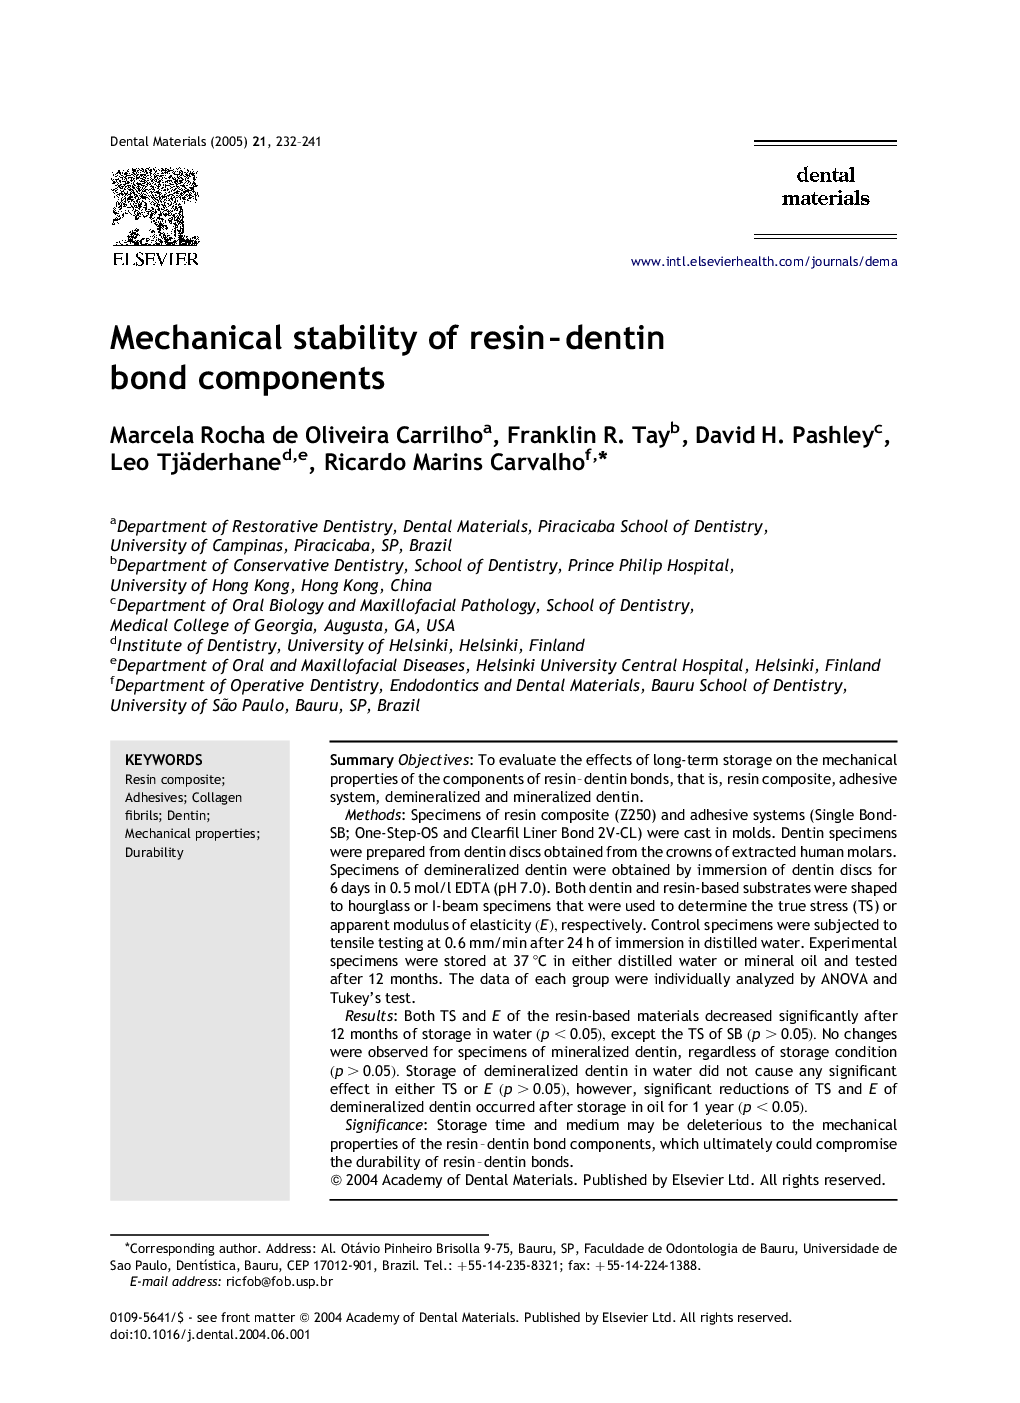 Mechanical stability of resin-dentin bond components